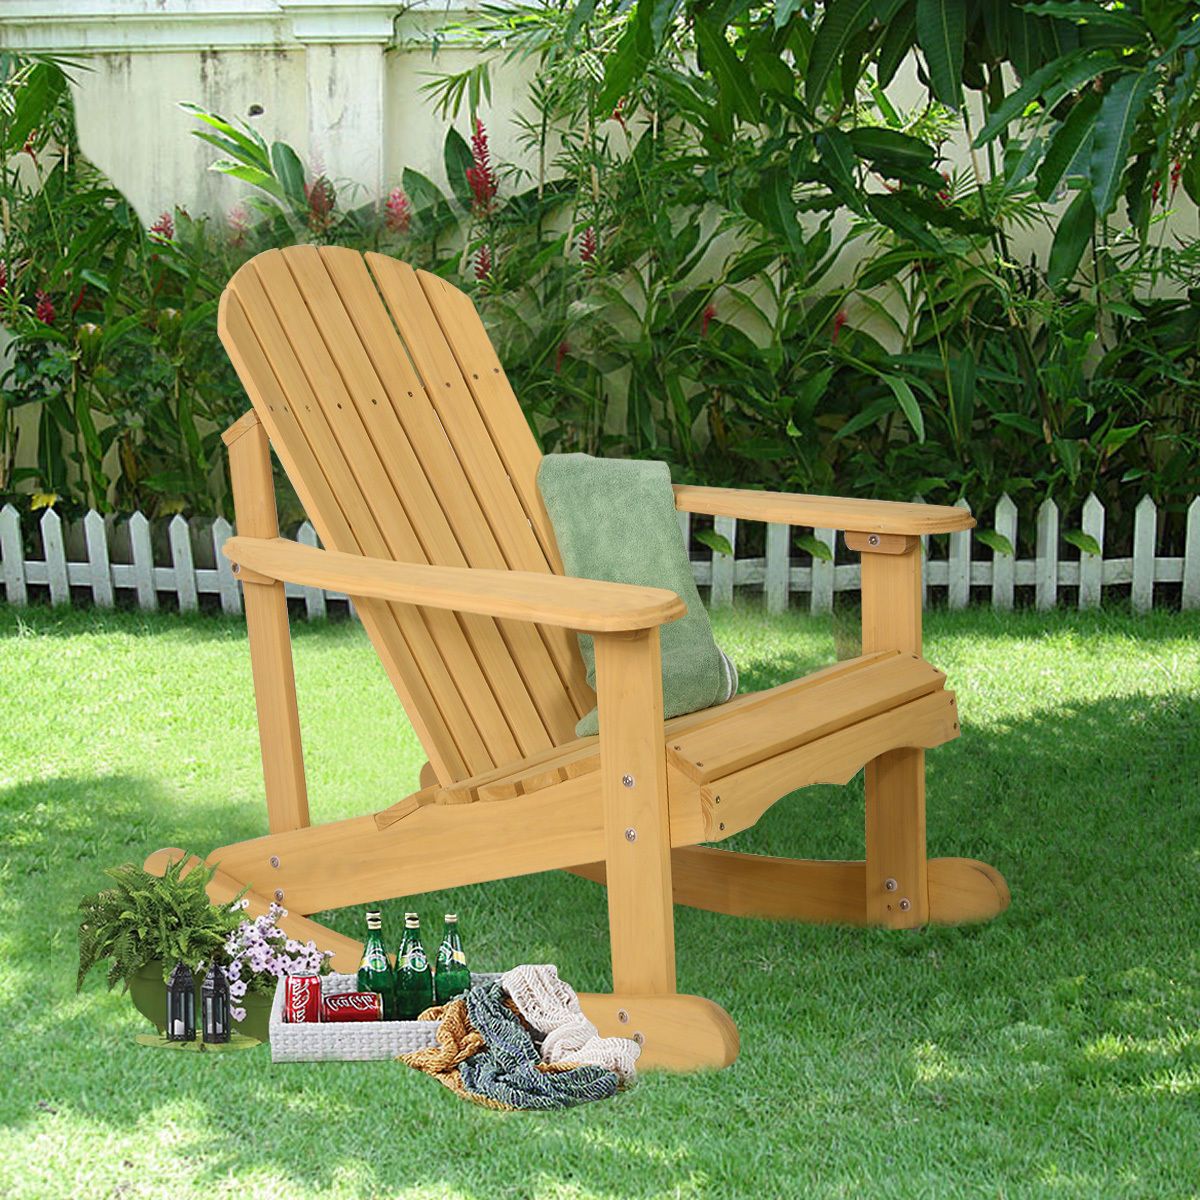 Wood Outdoor Armchair Sets Intended For Most Recent Outdoor Natural Fir Wood Adirondack Rocking Chair Patio Deck Garden (View 14 of 15)